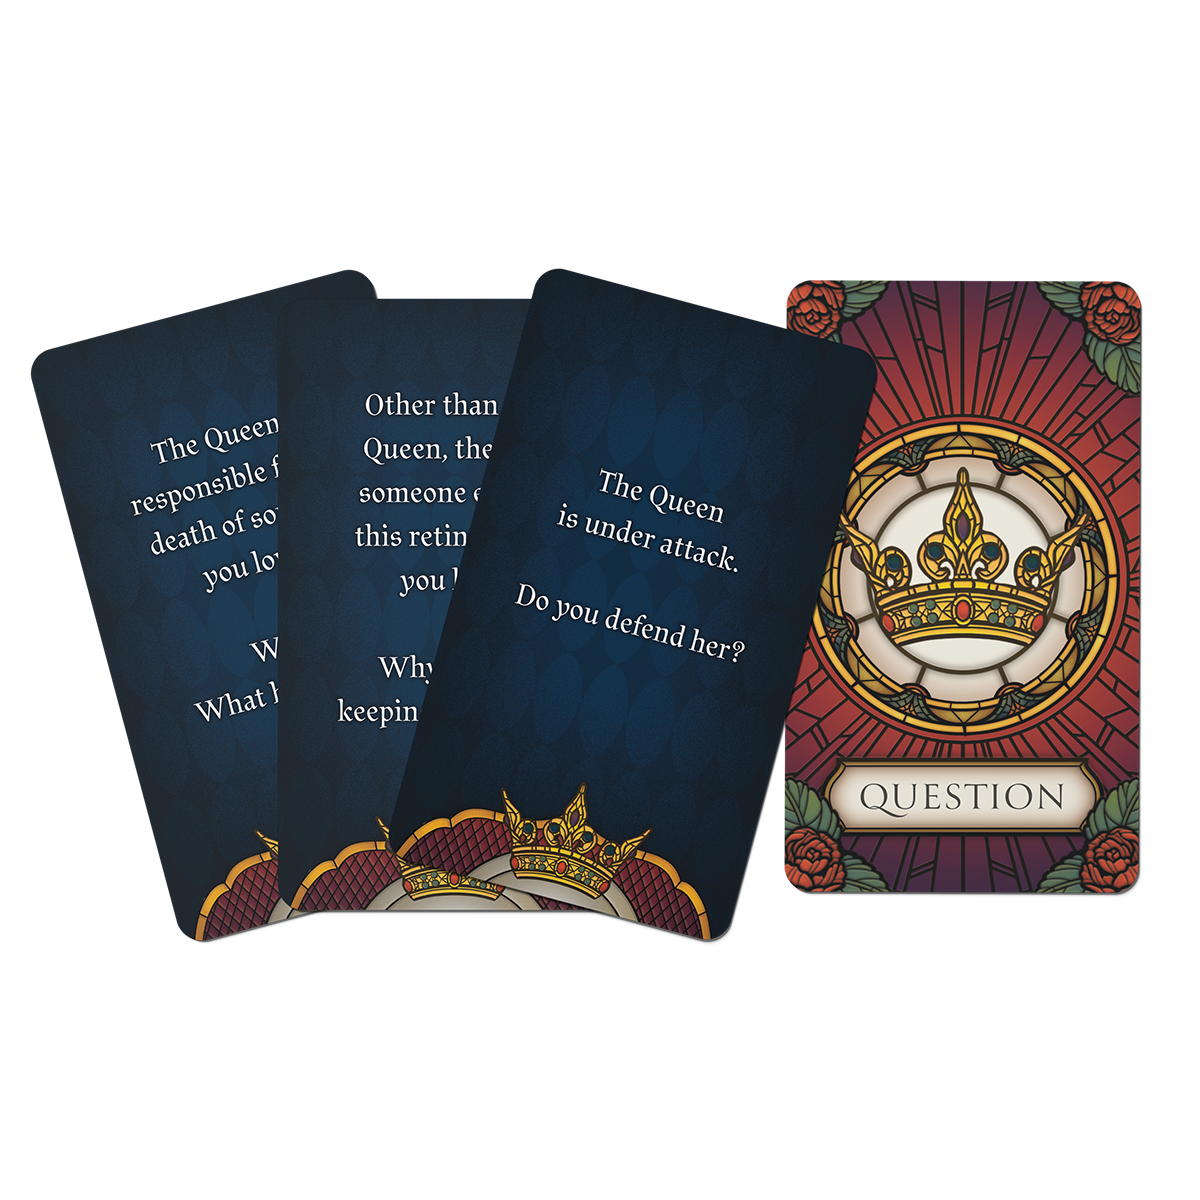 For the Queen - Card-Based Story-Building Game - Bards & Cards